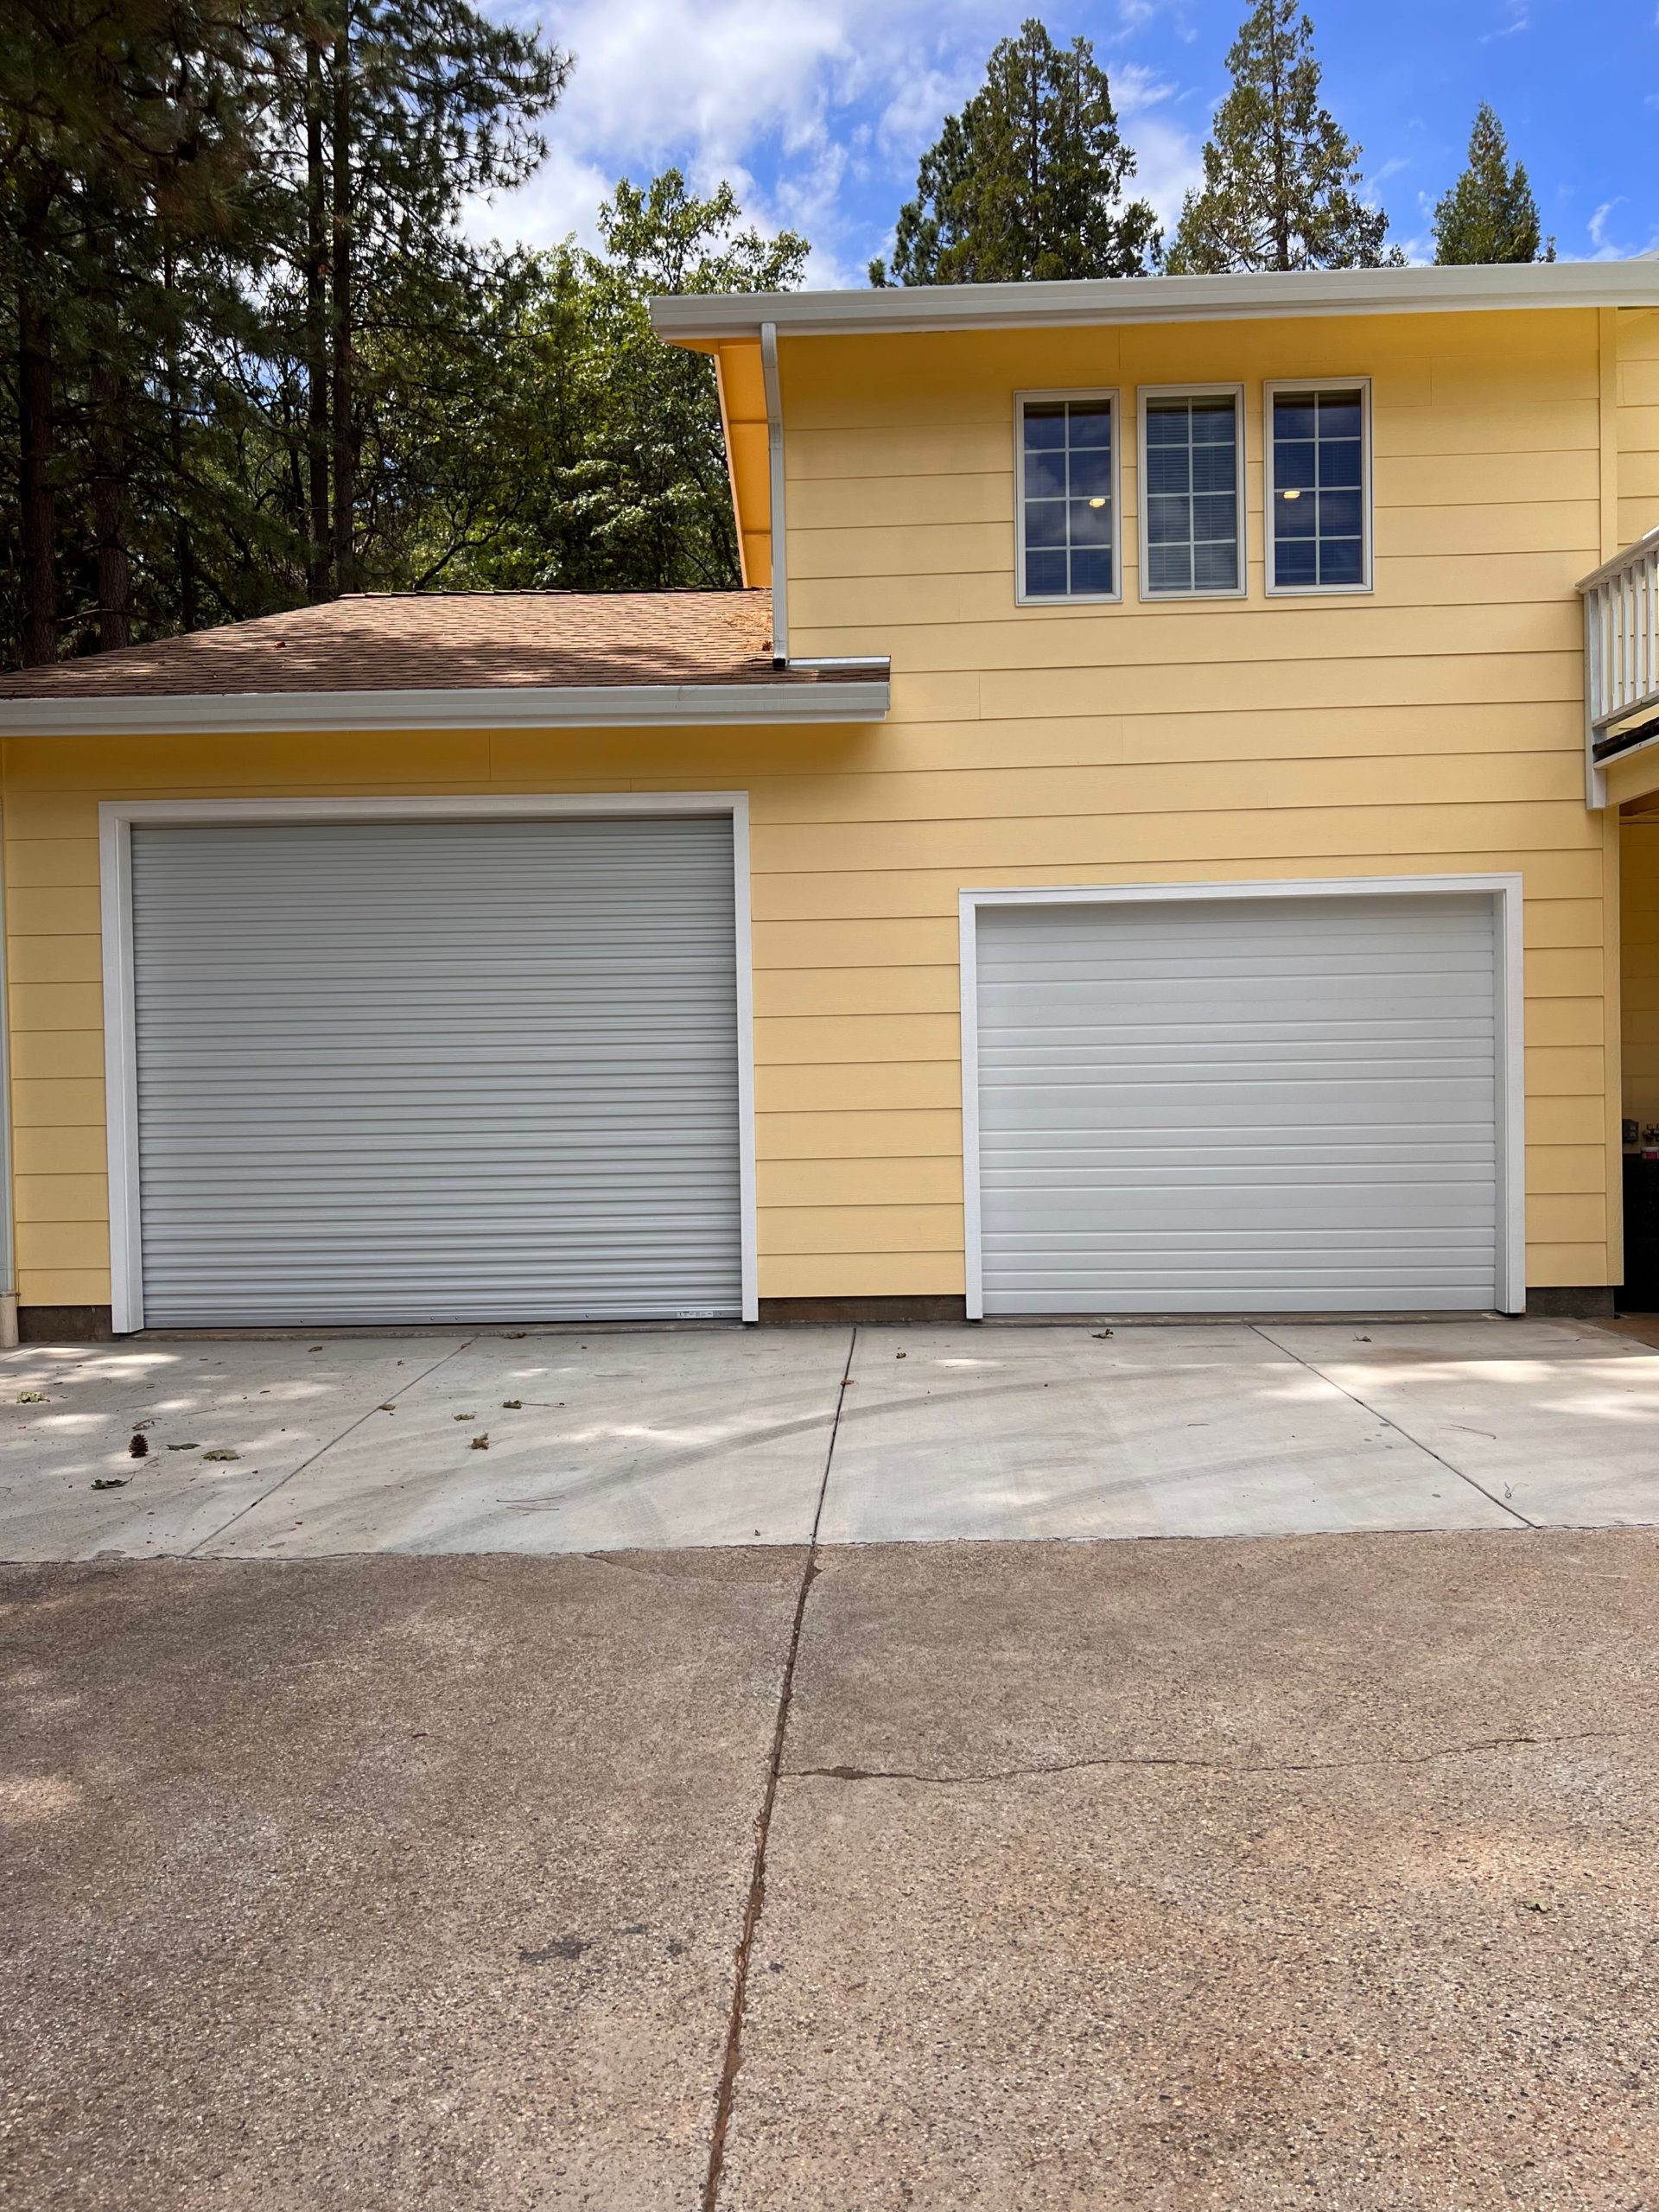 SHOP/GARAGE For Lease off 174 in Grass Valley